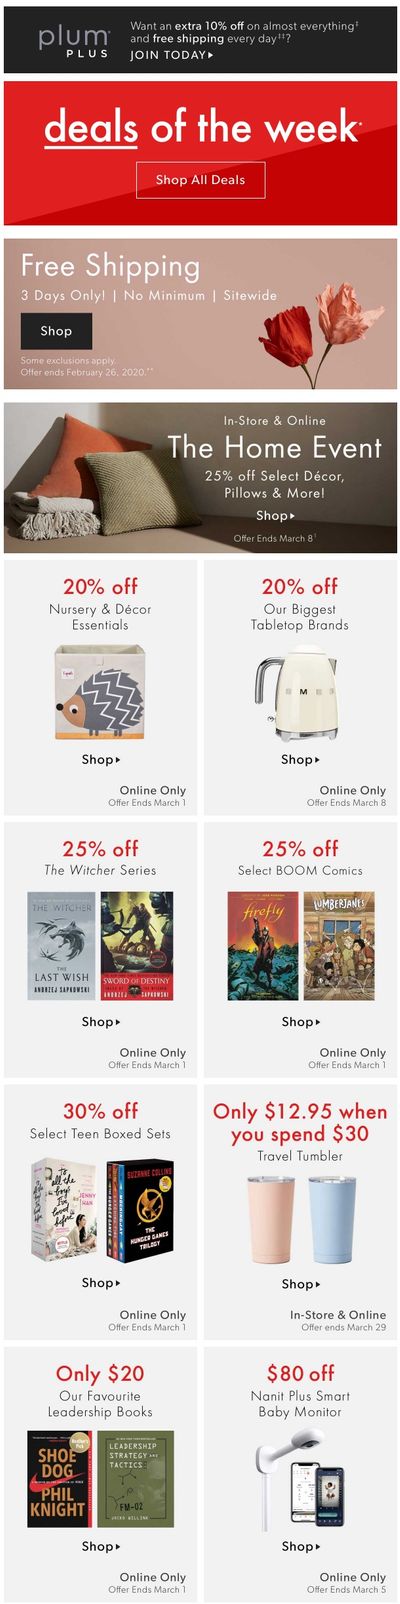 Chapters Indigo Online Deals of the Week February 24 to March 1